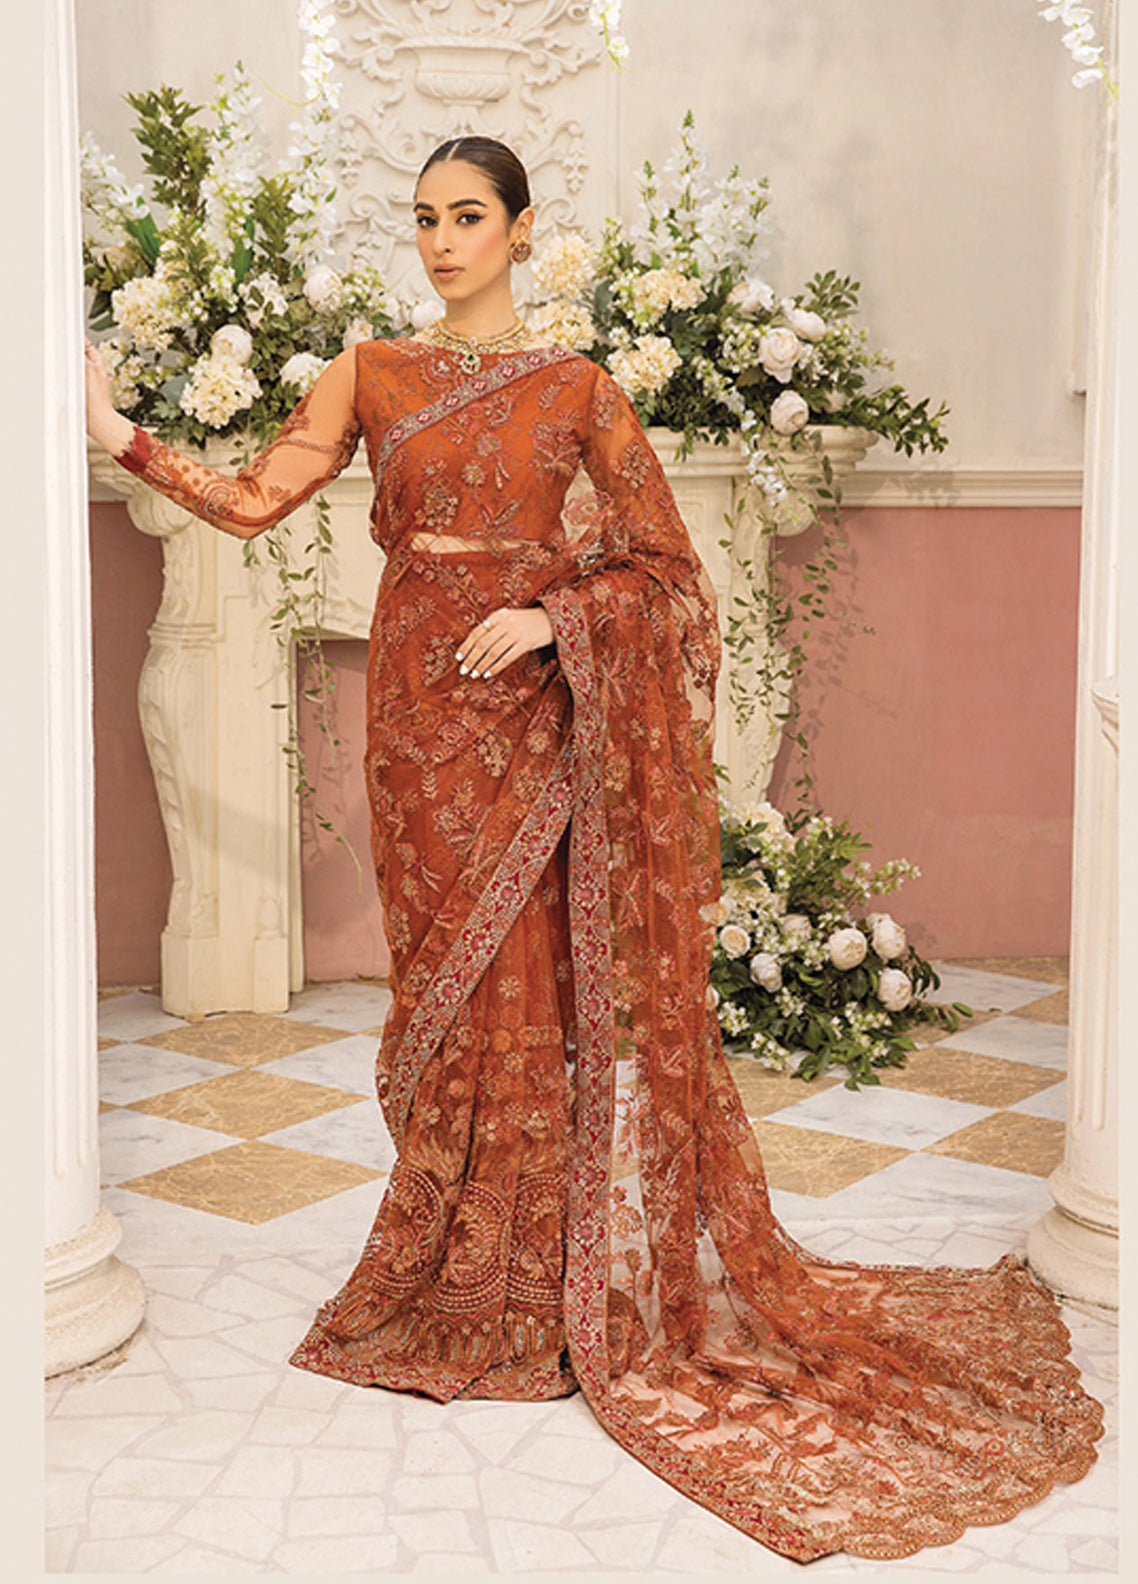 D#09 Xenia Ishya Luxury Formal Emb Collection 223